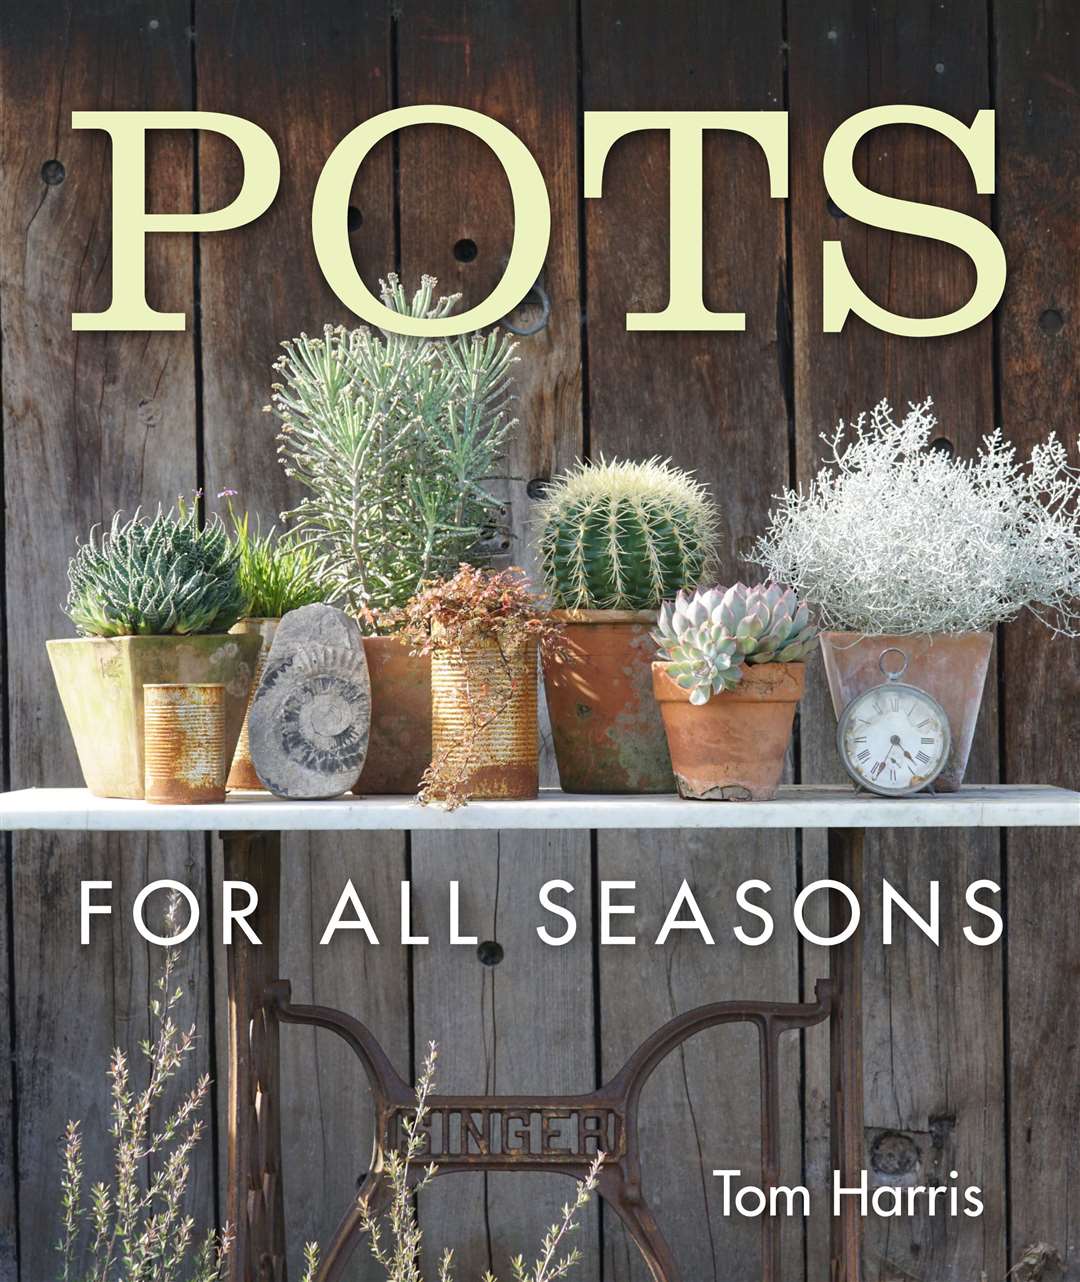 Pots For All Seasons by Tom Harris.